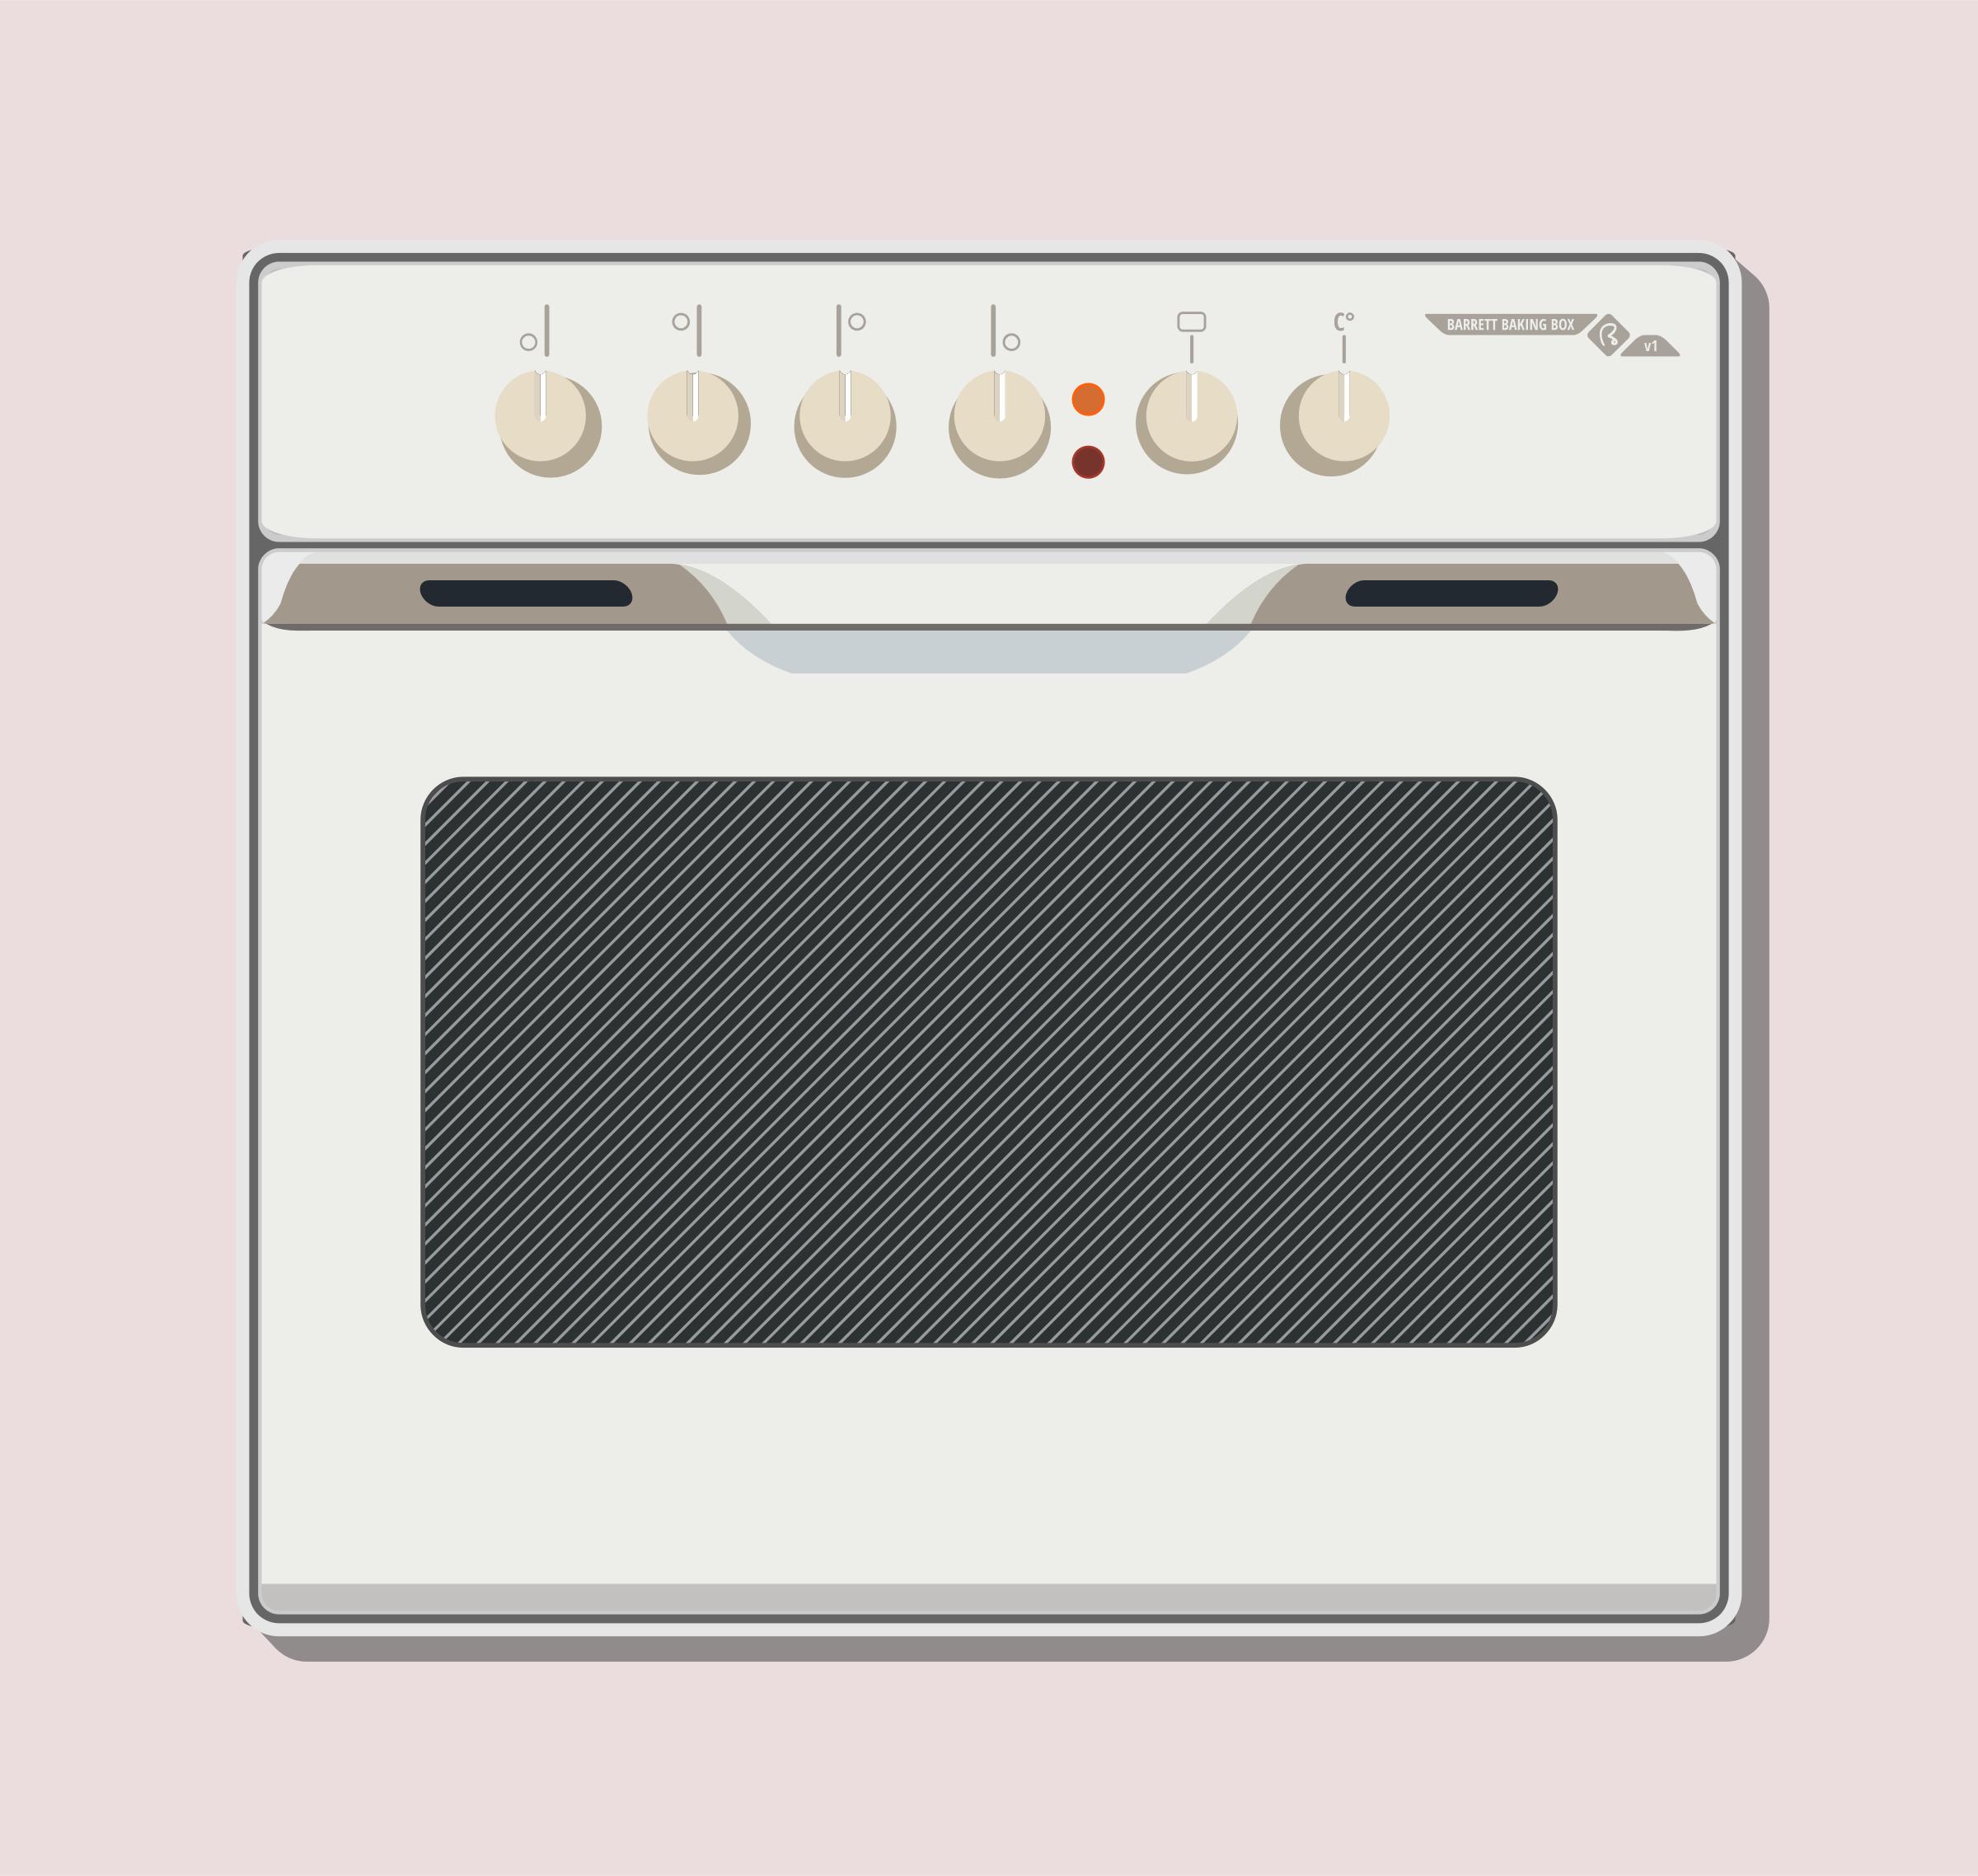 A Simple Oven png